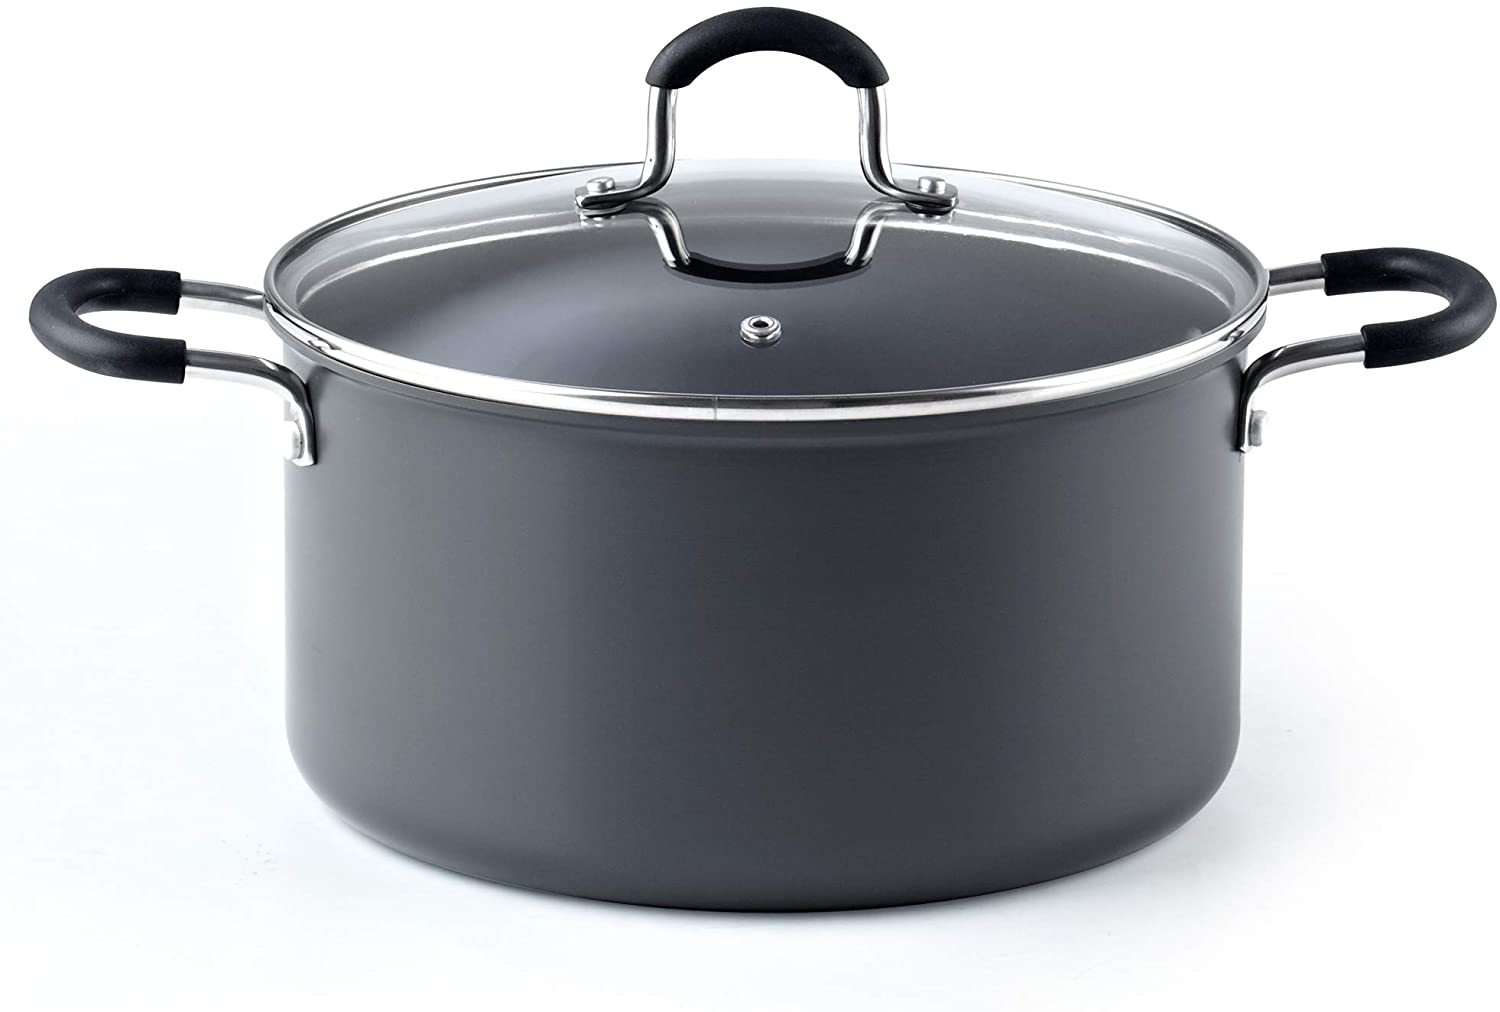  Shallow Cast Iron Casserole with Lid – Non Stick Dutch Oven  Pot, Oven Safe up to 500° F – Sturdy Ovenproof Stockpot Cookware –  Enamelled Cooking Pot – Grey, 3.7-Quart, 30cm –